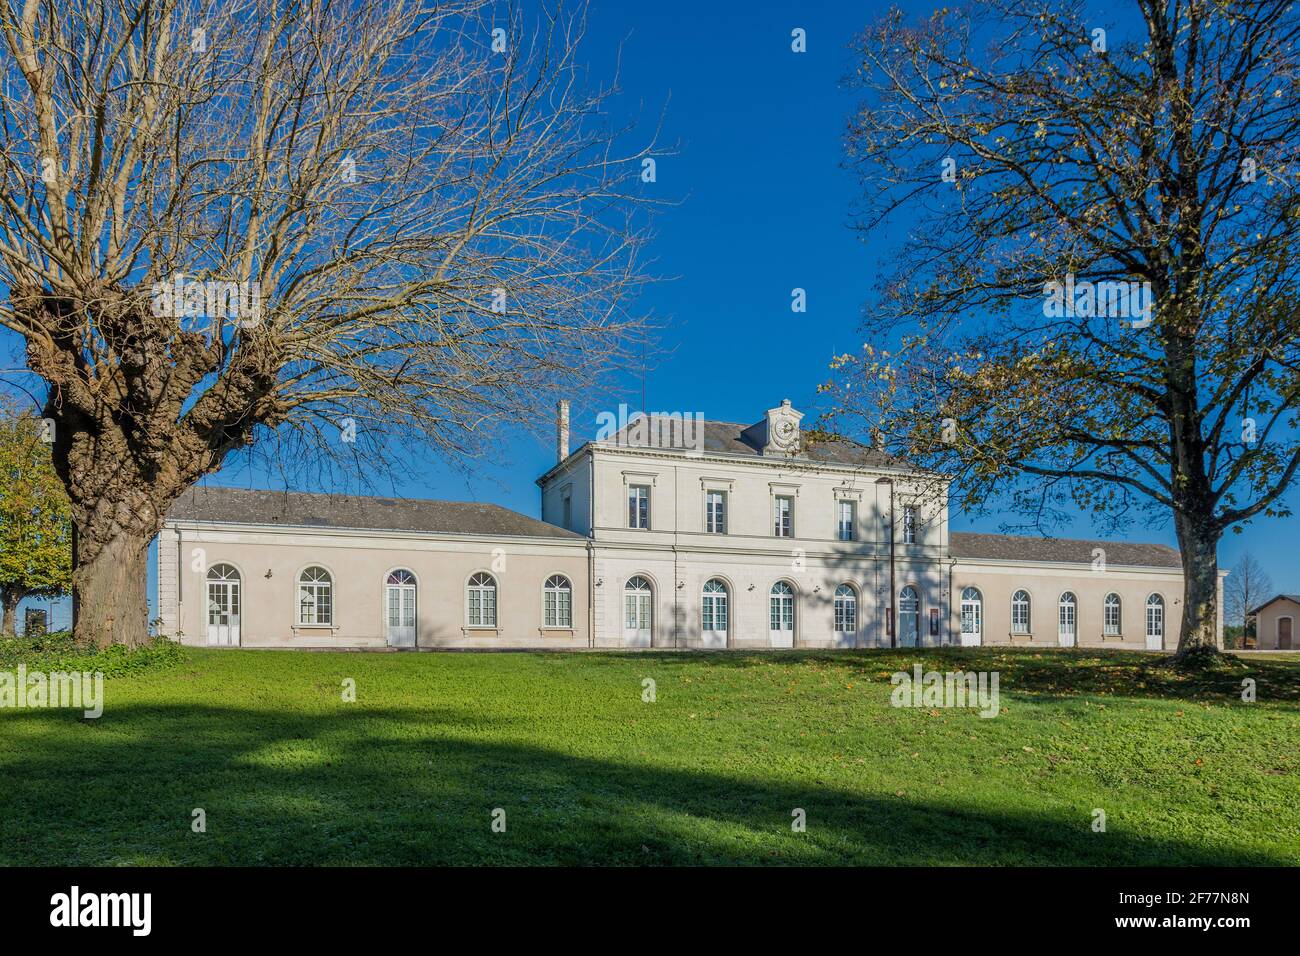 Disused railway station converted to other uses and functions, Le Blanc, Indre (36), France. Stock Photo